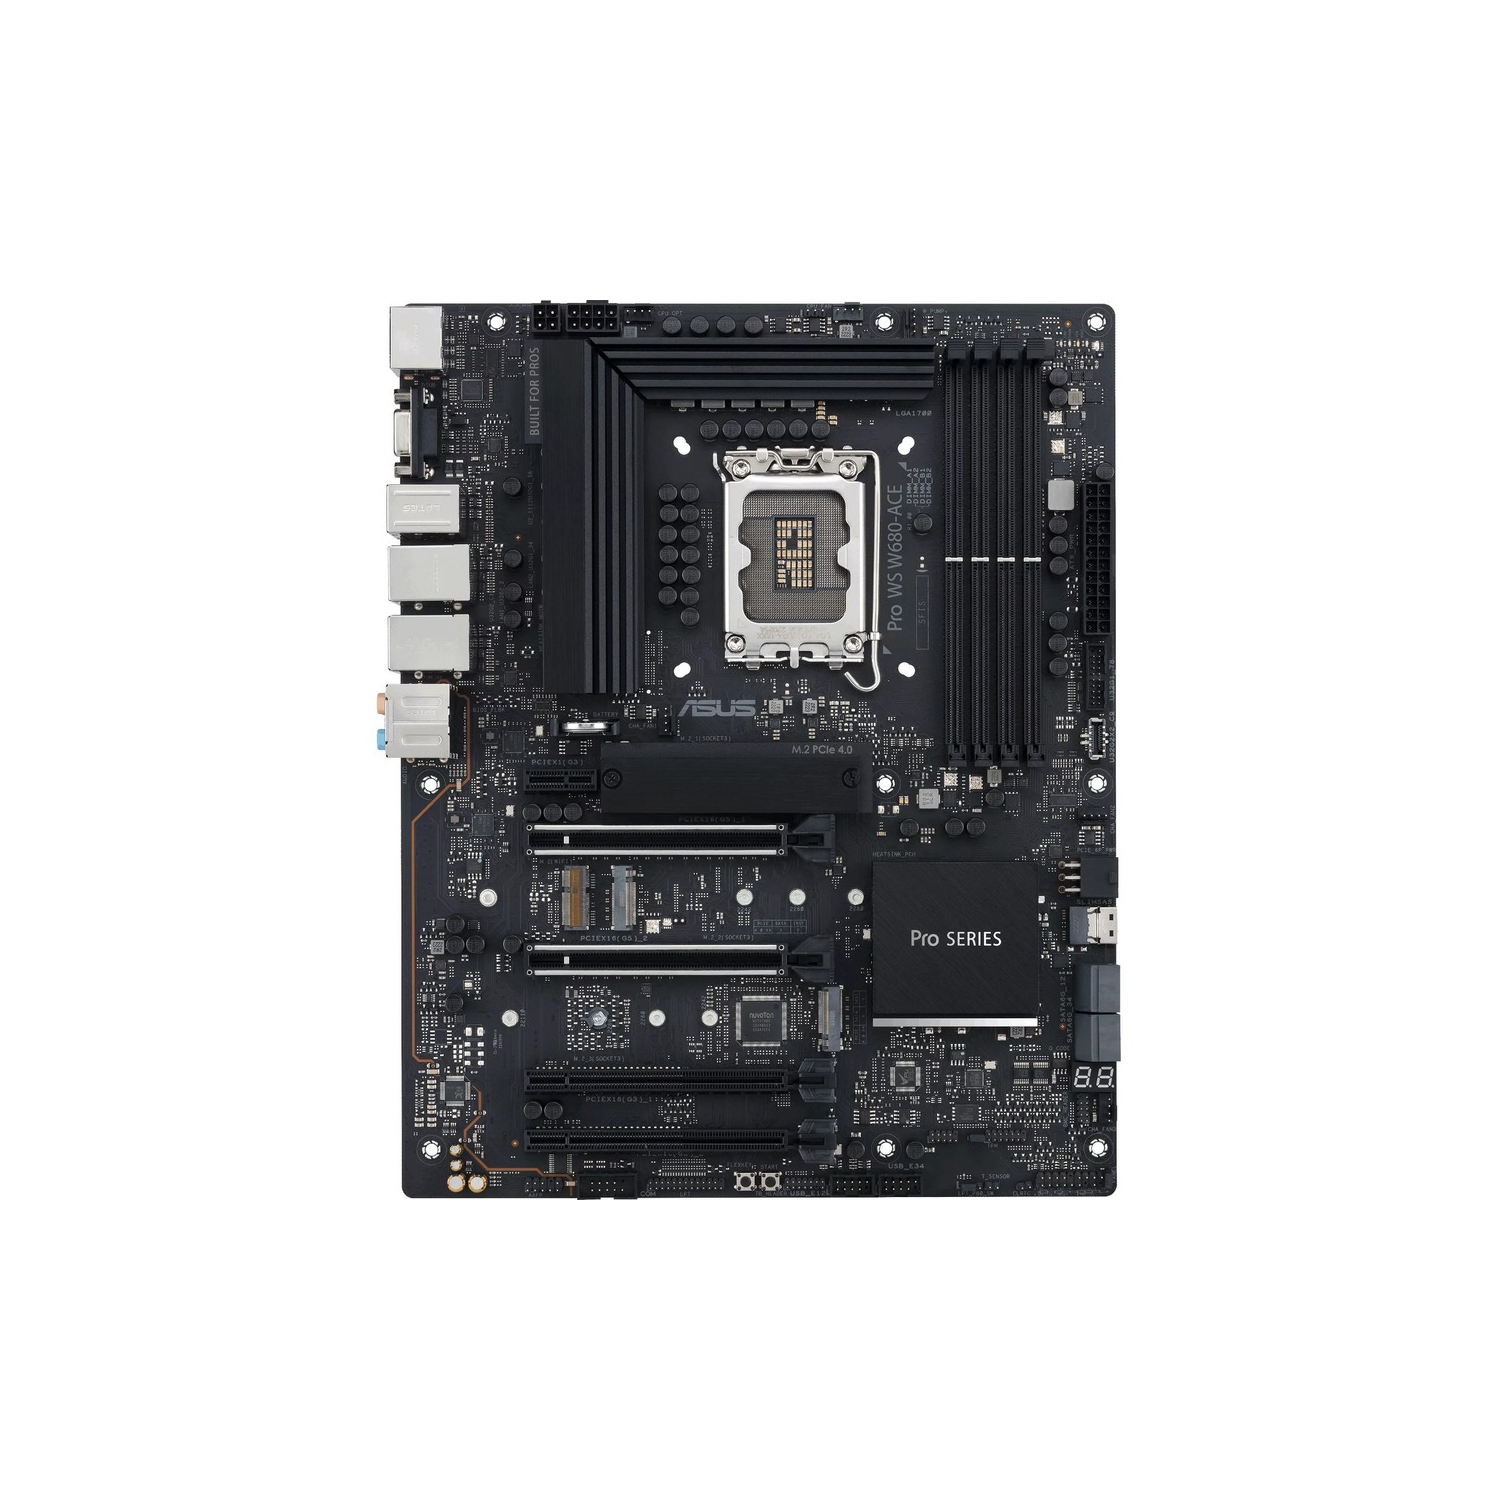 Asus Pro WS W680-ACE Workstation Motherboard PRO WS W680-ACE